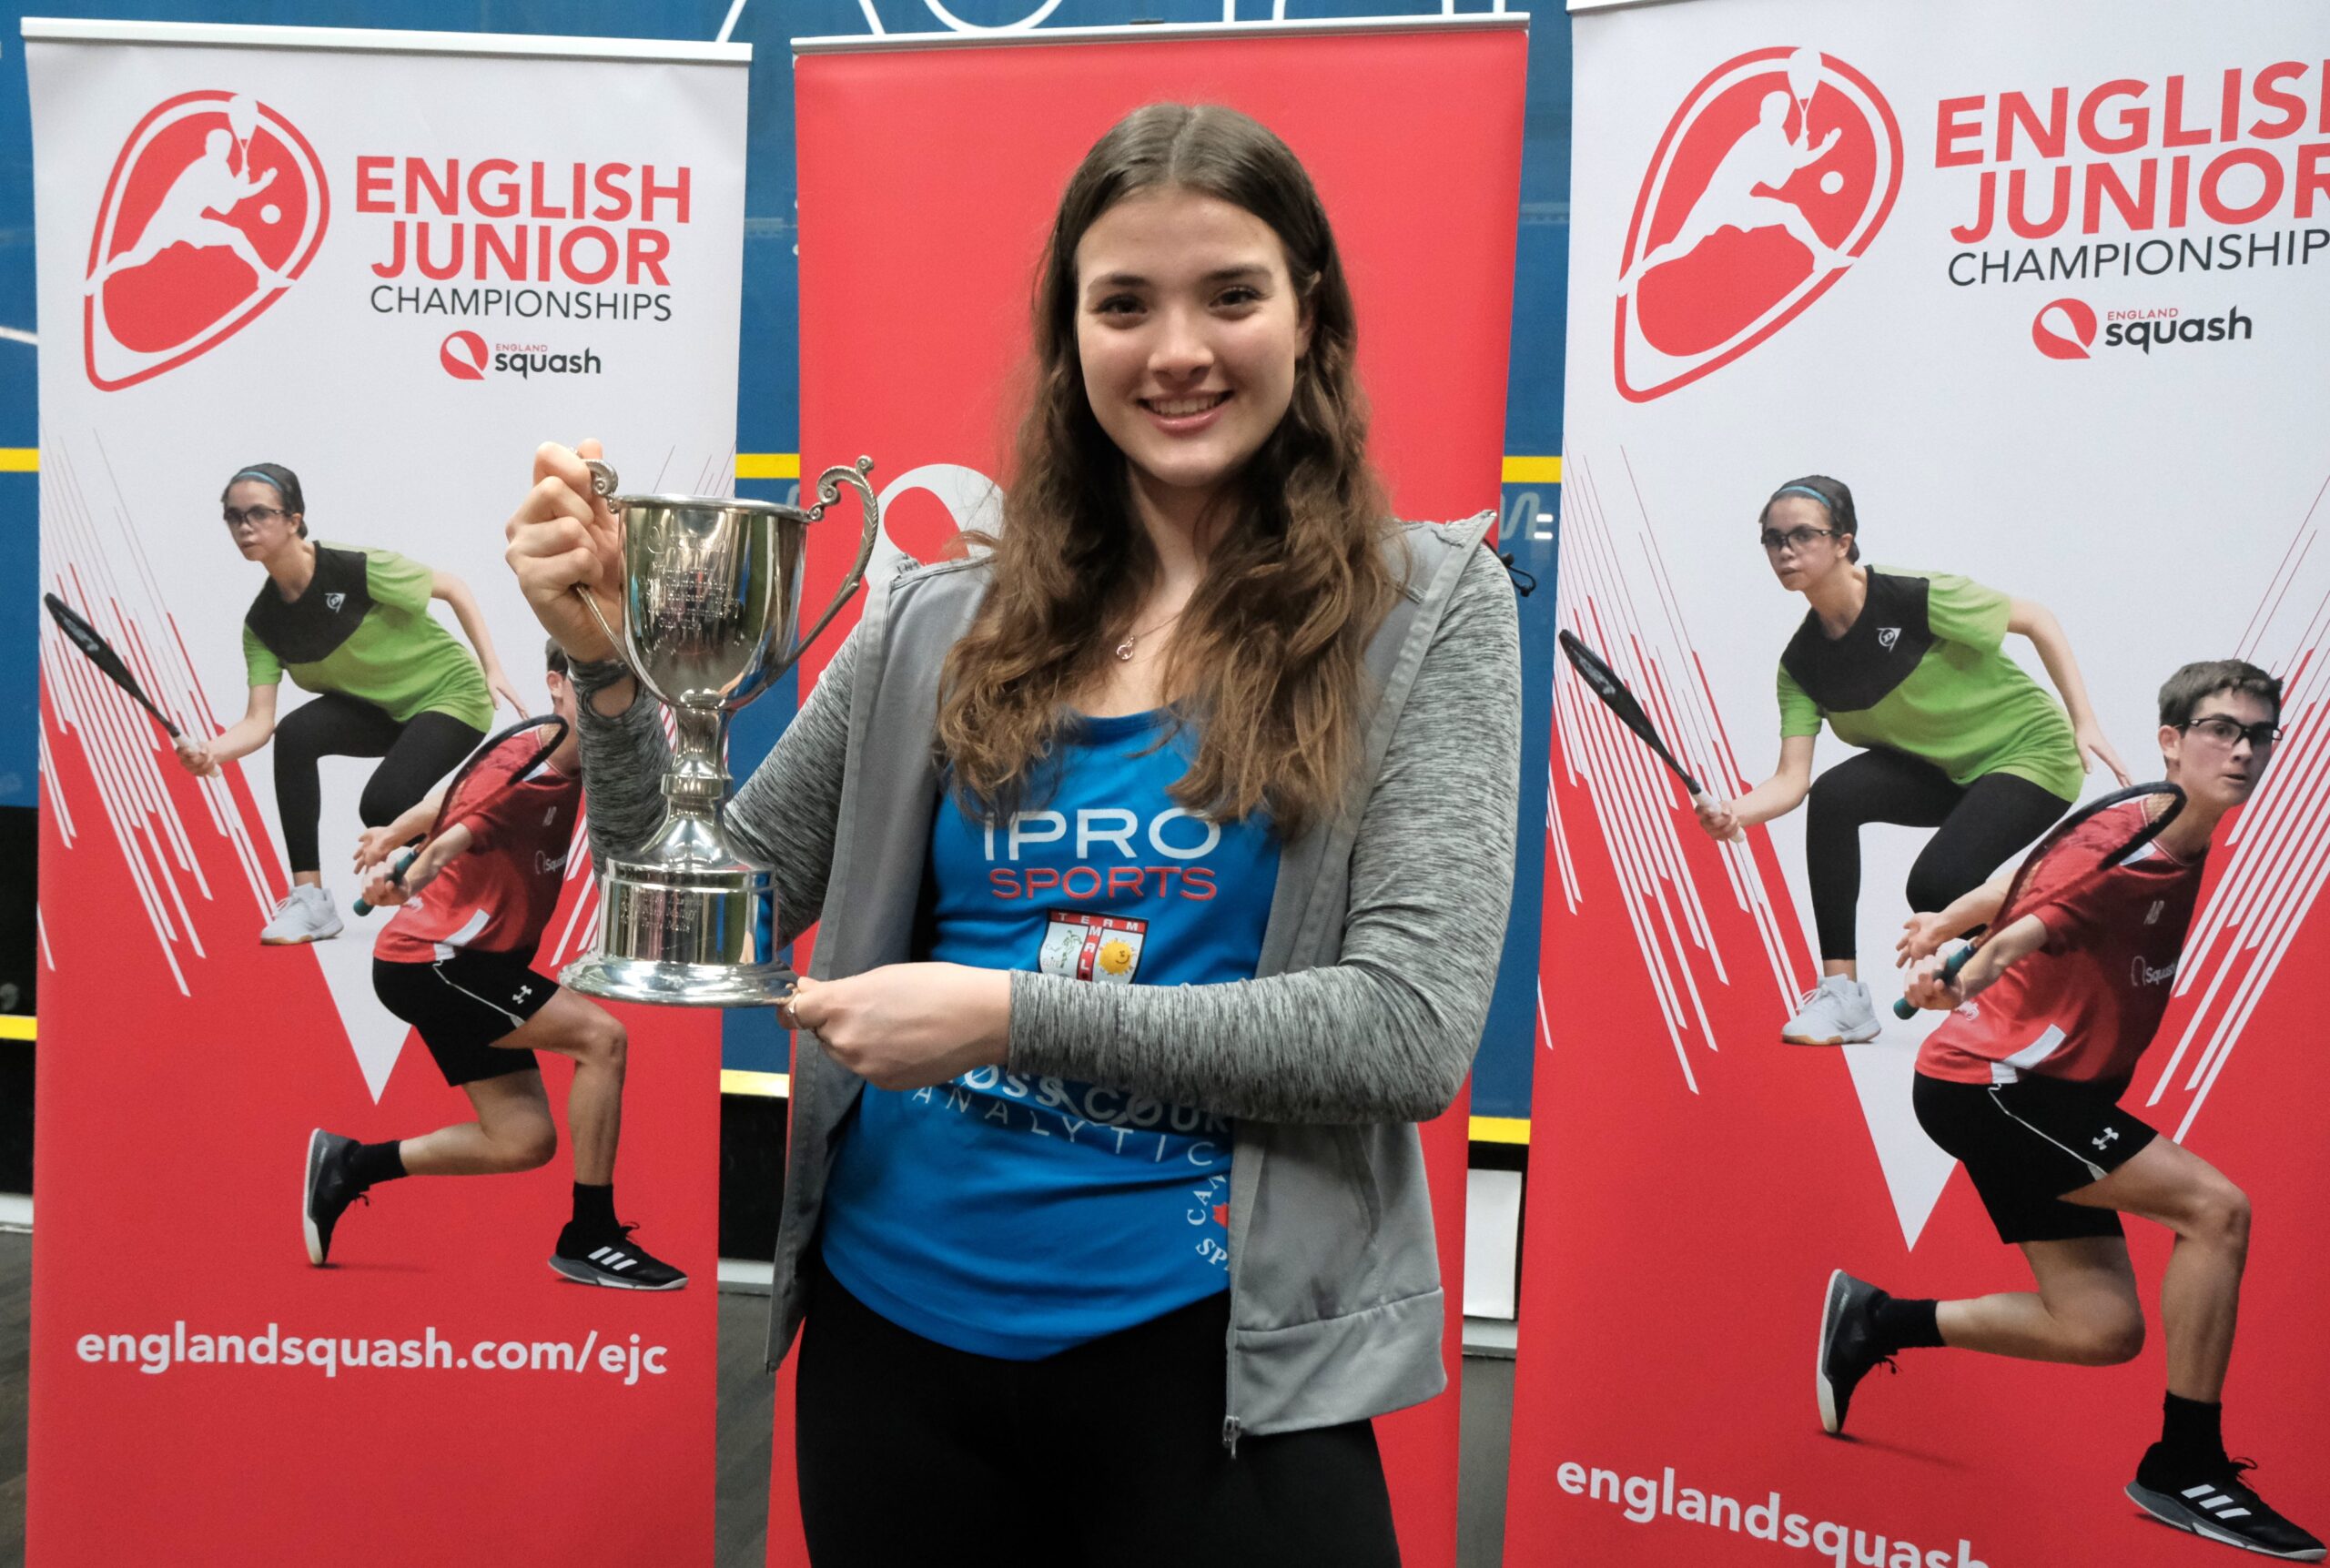 Torrie Malik with the English Junior Championships trophy.